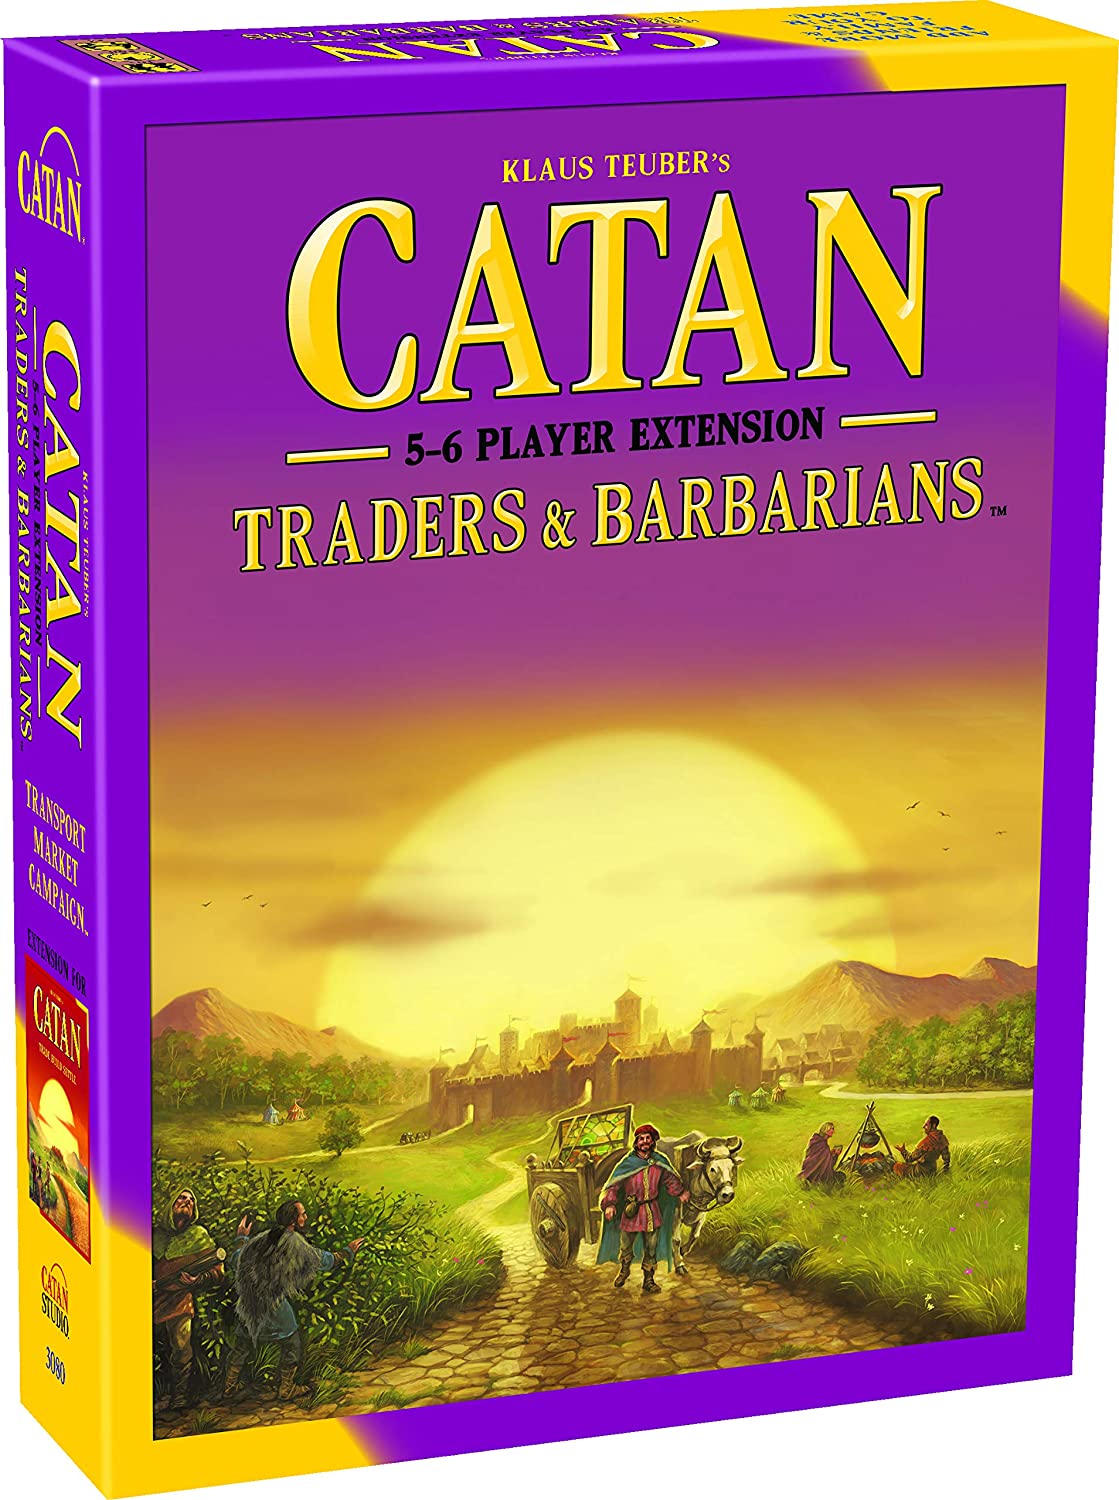 Catan: Traders and Barbarians - 5-6 Player Extension